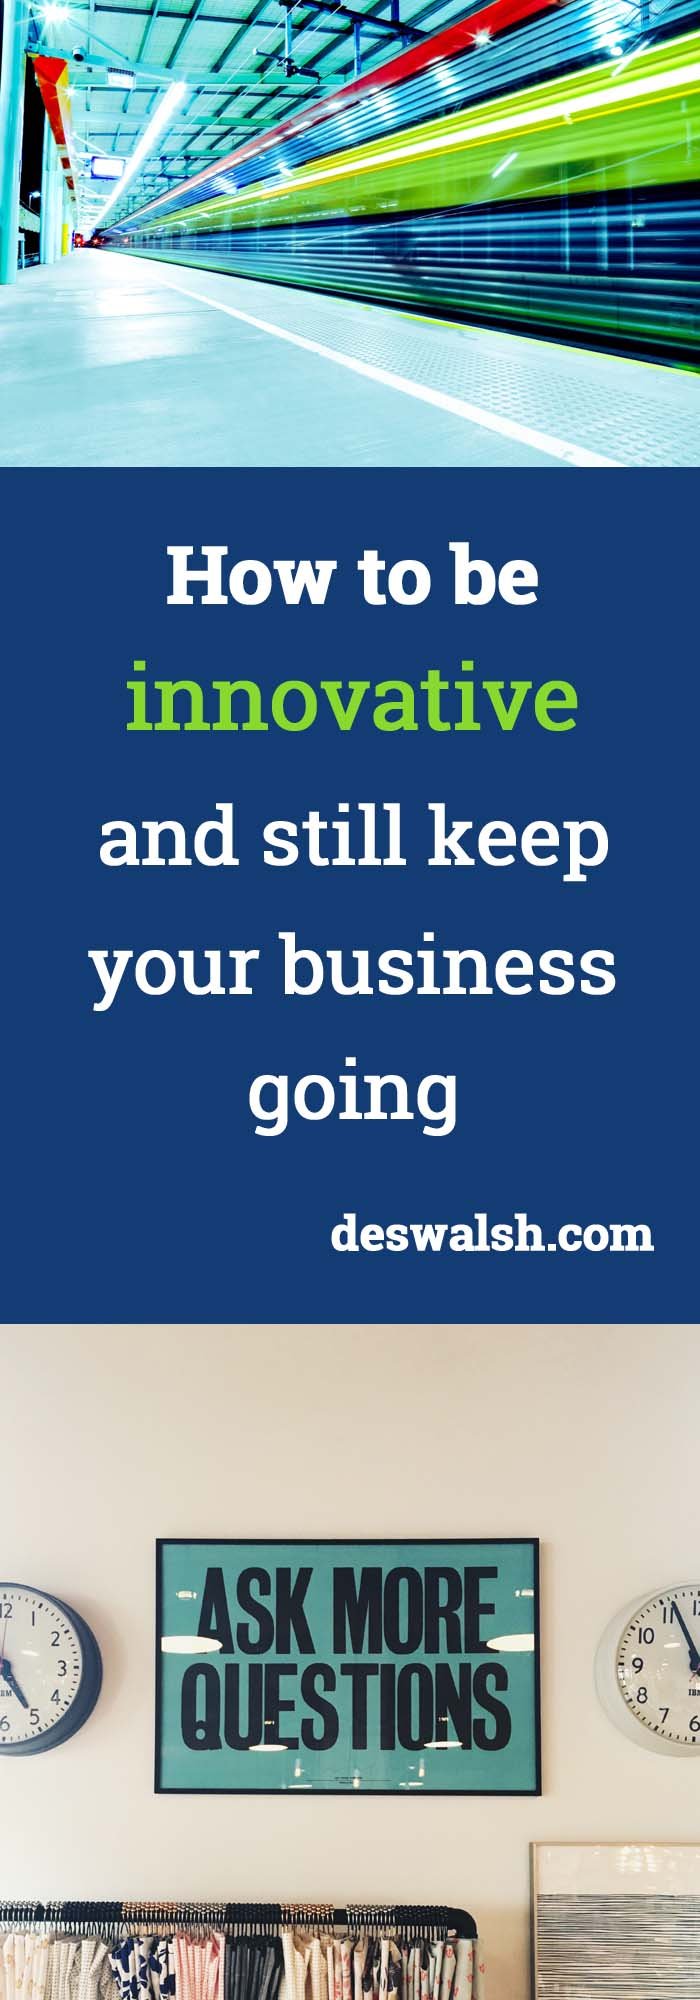 How to be innovative and still keep your business going